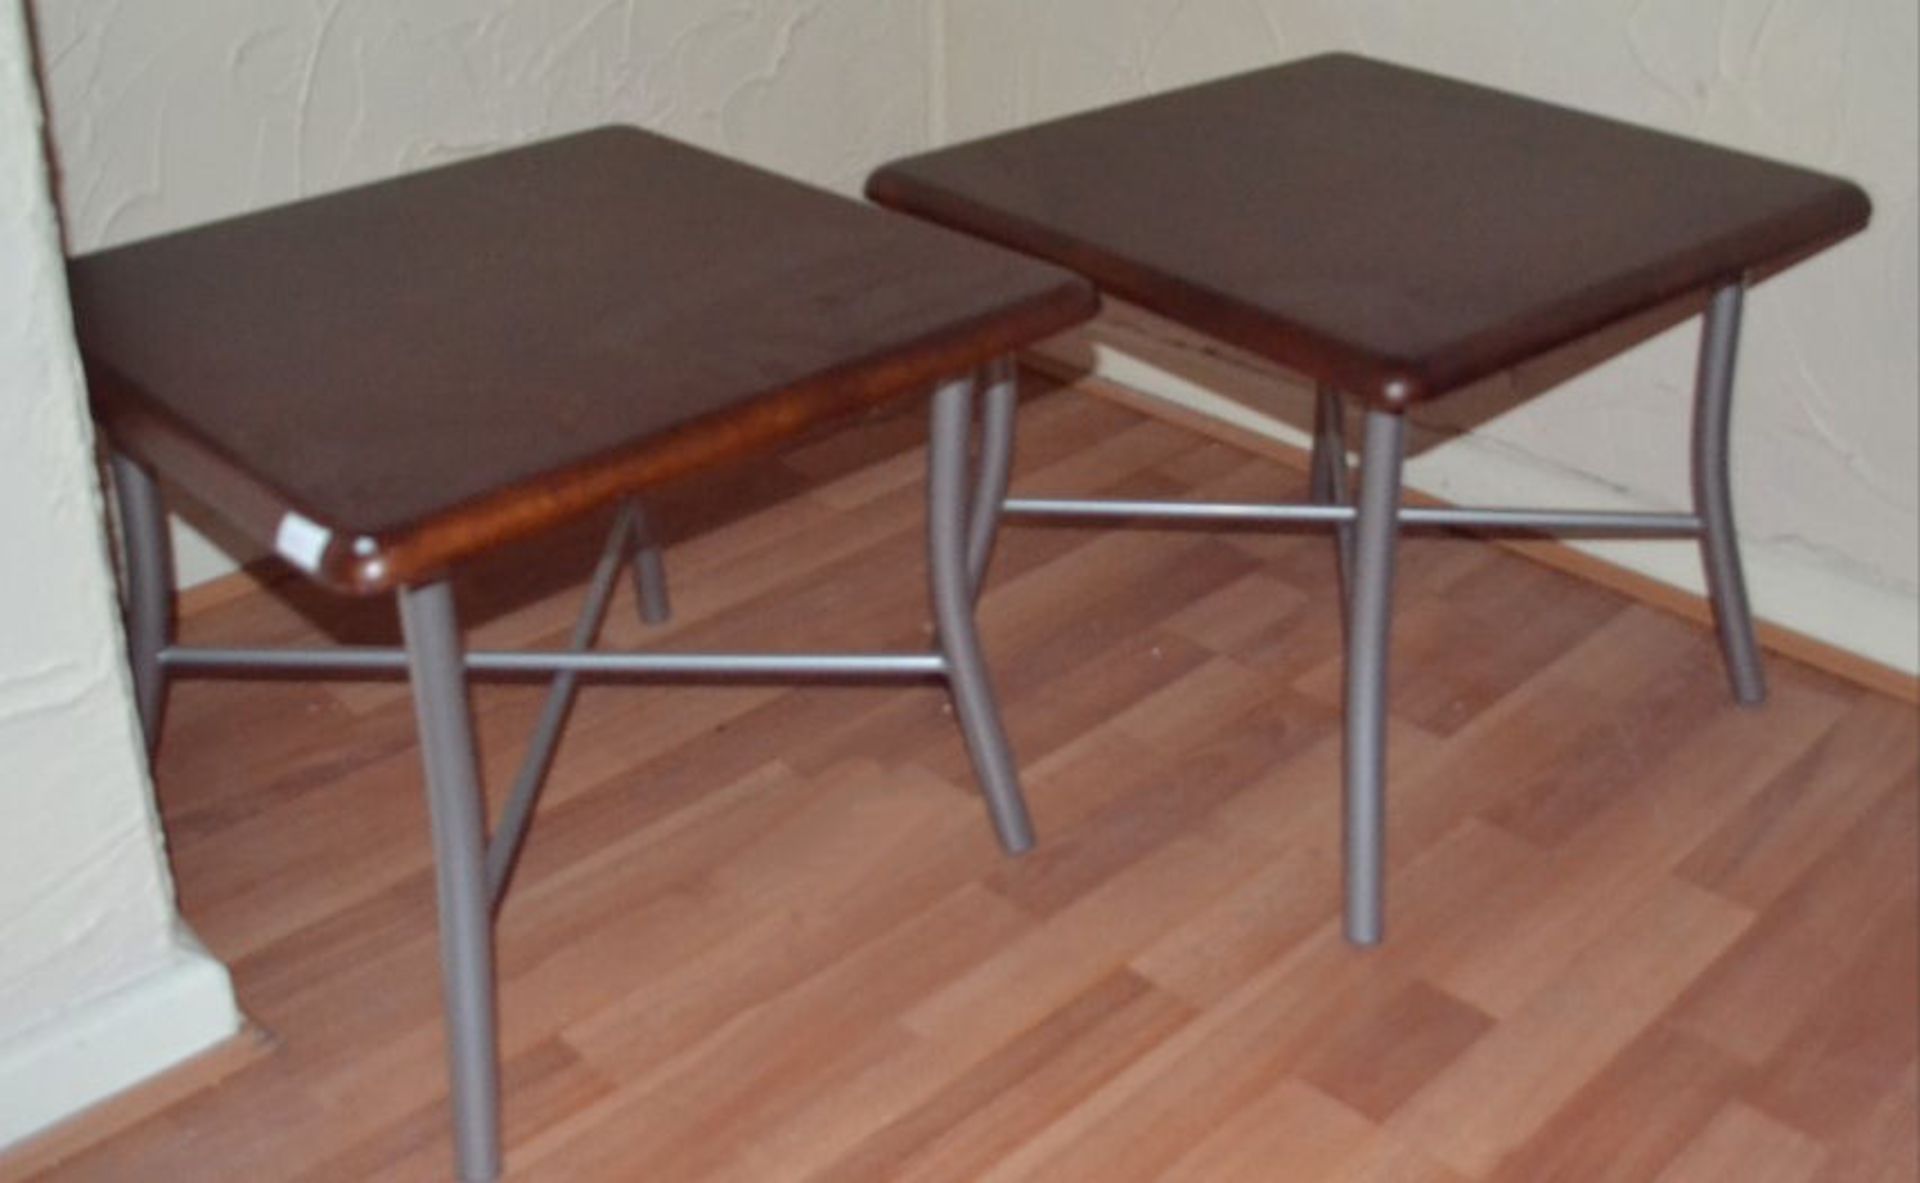 2 Small Square Dark Wood Occasional Tables with Silver Legs - Image 3 of 3